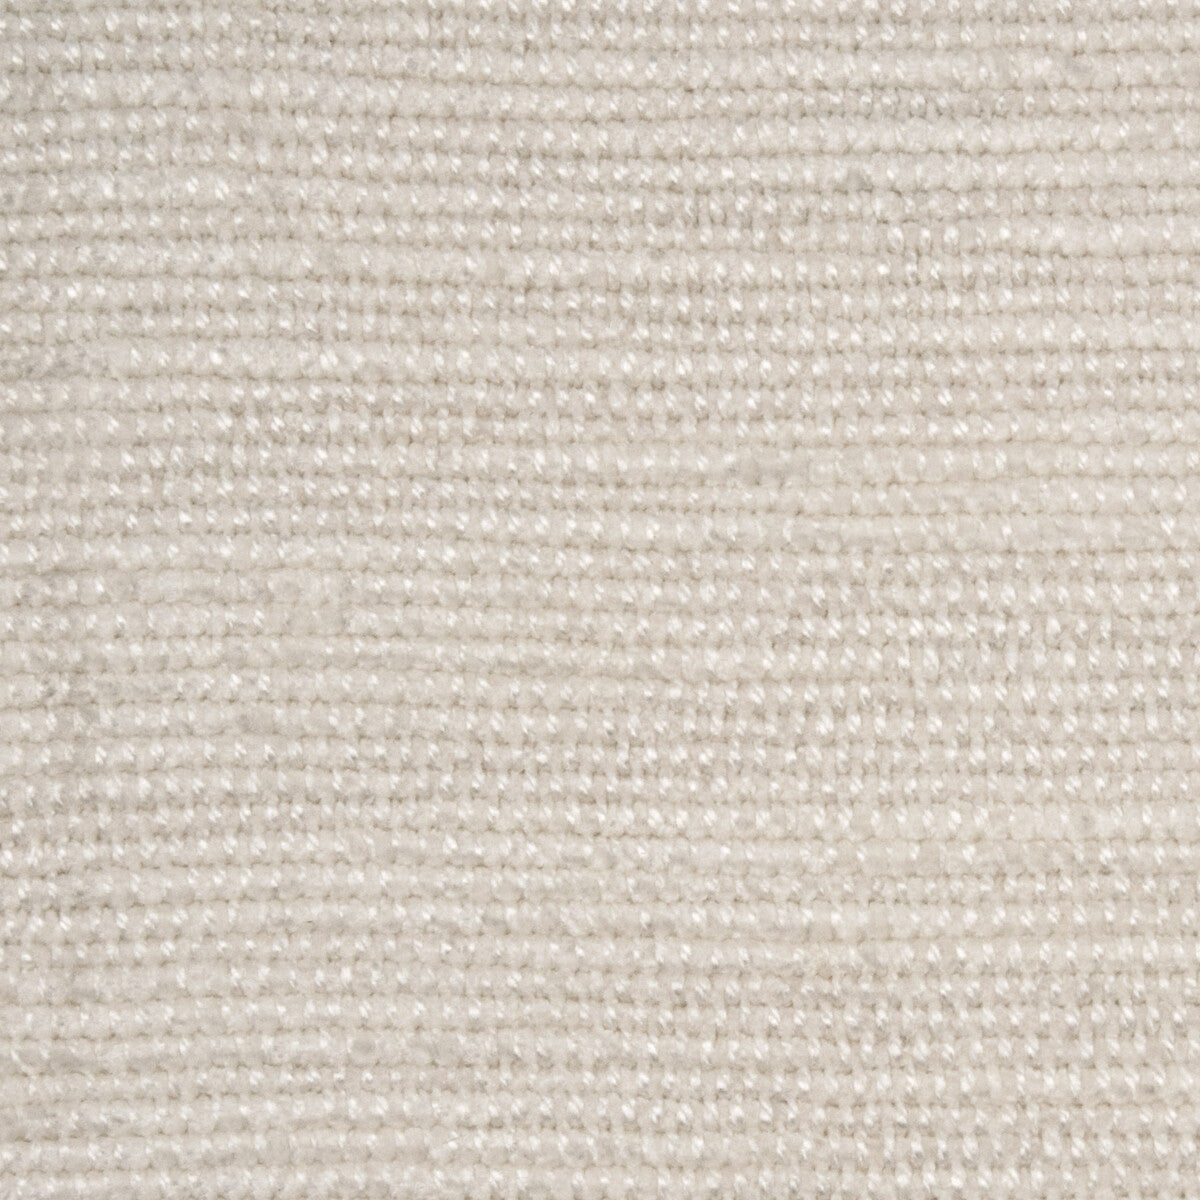 Charisma fabric in white color - pattern ED85189.100.0 - by Threads in the Threads Colour Library collection